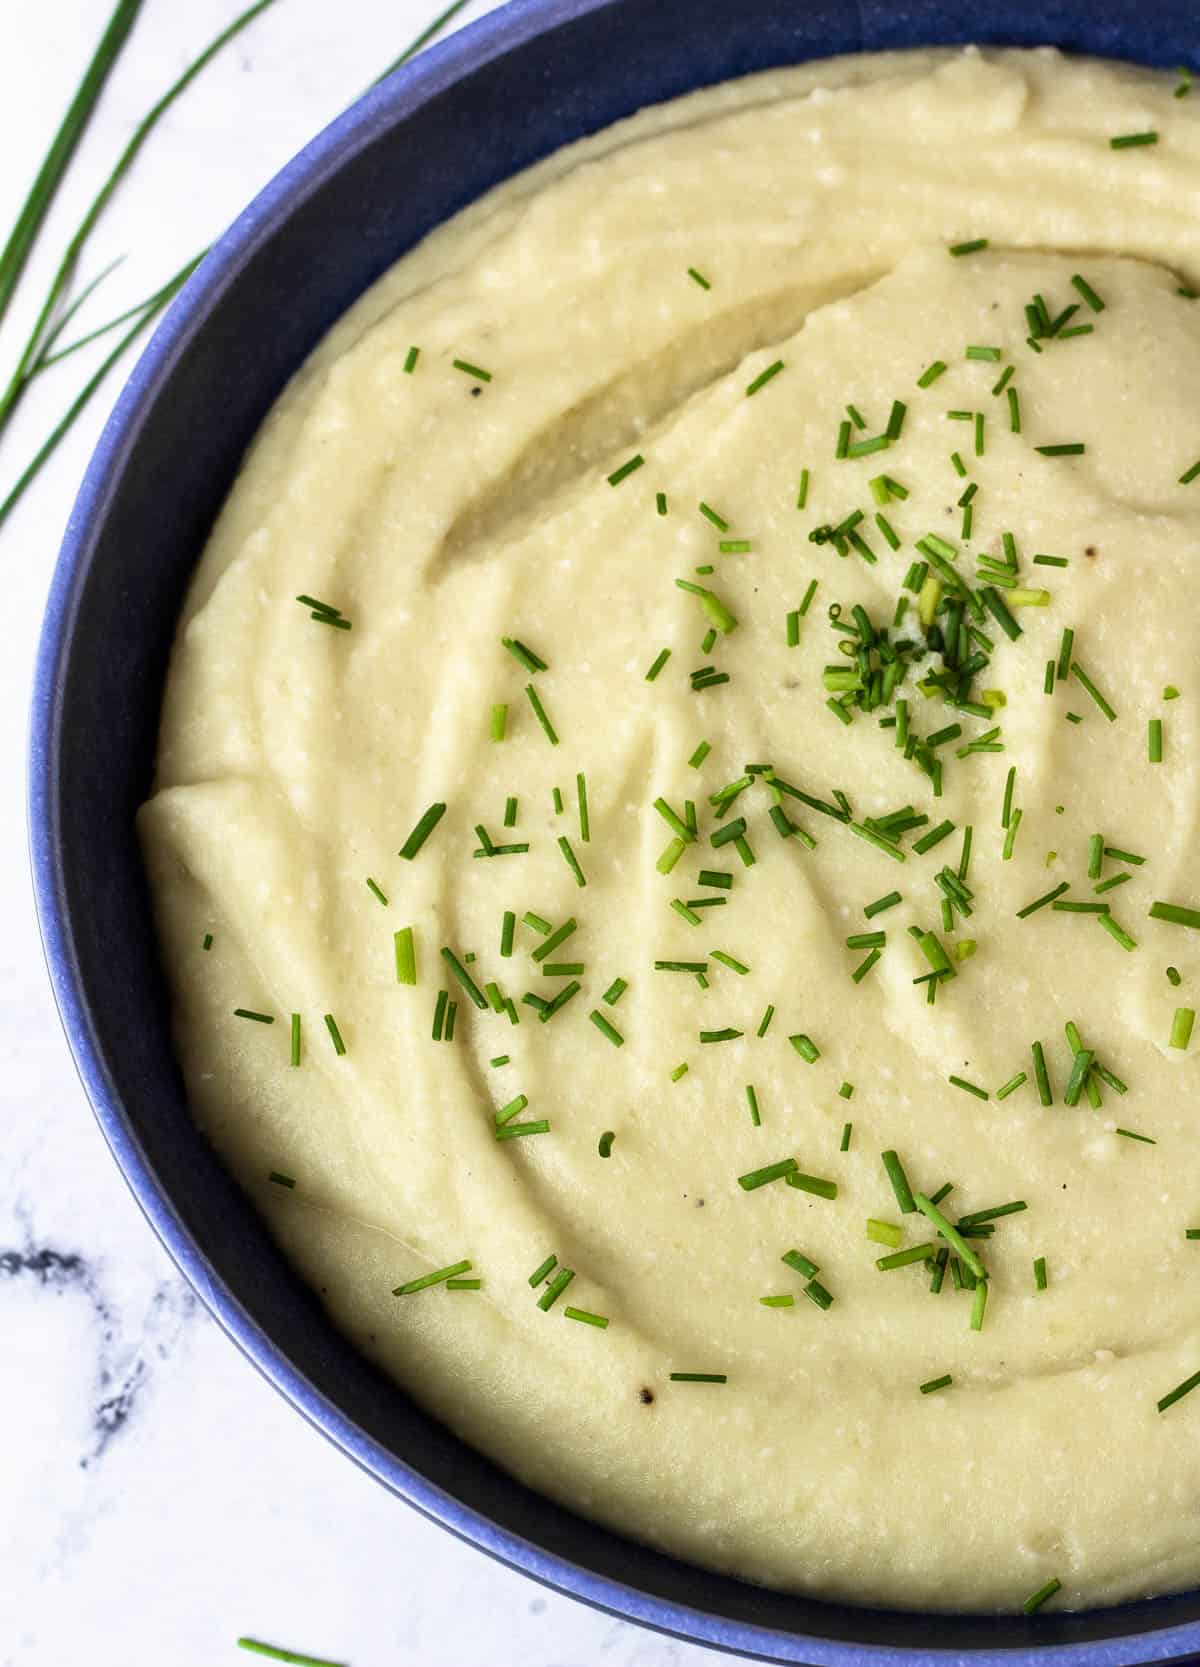 Mashed potatoes with almond milk in blue serving bowl.